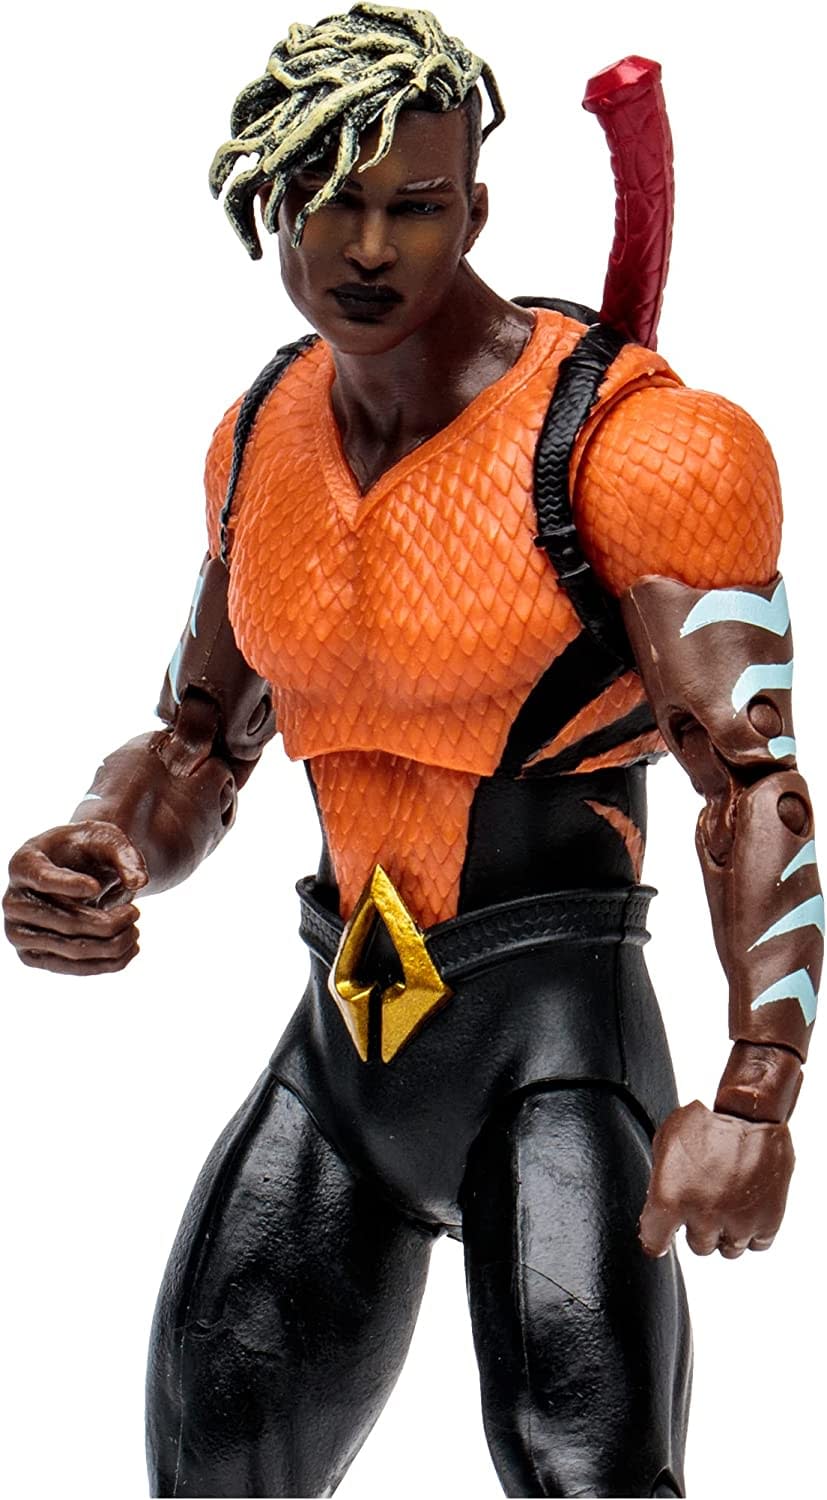 DC Comics Aqualad Joins the DC Multiverse with McFarlane Toys